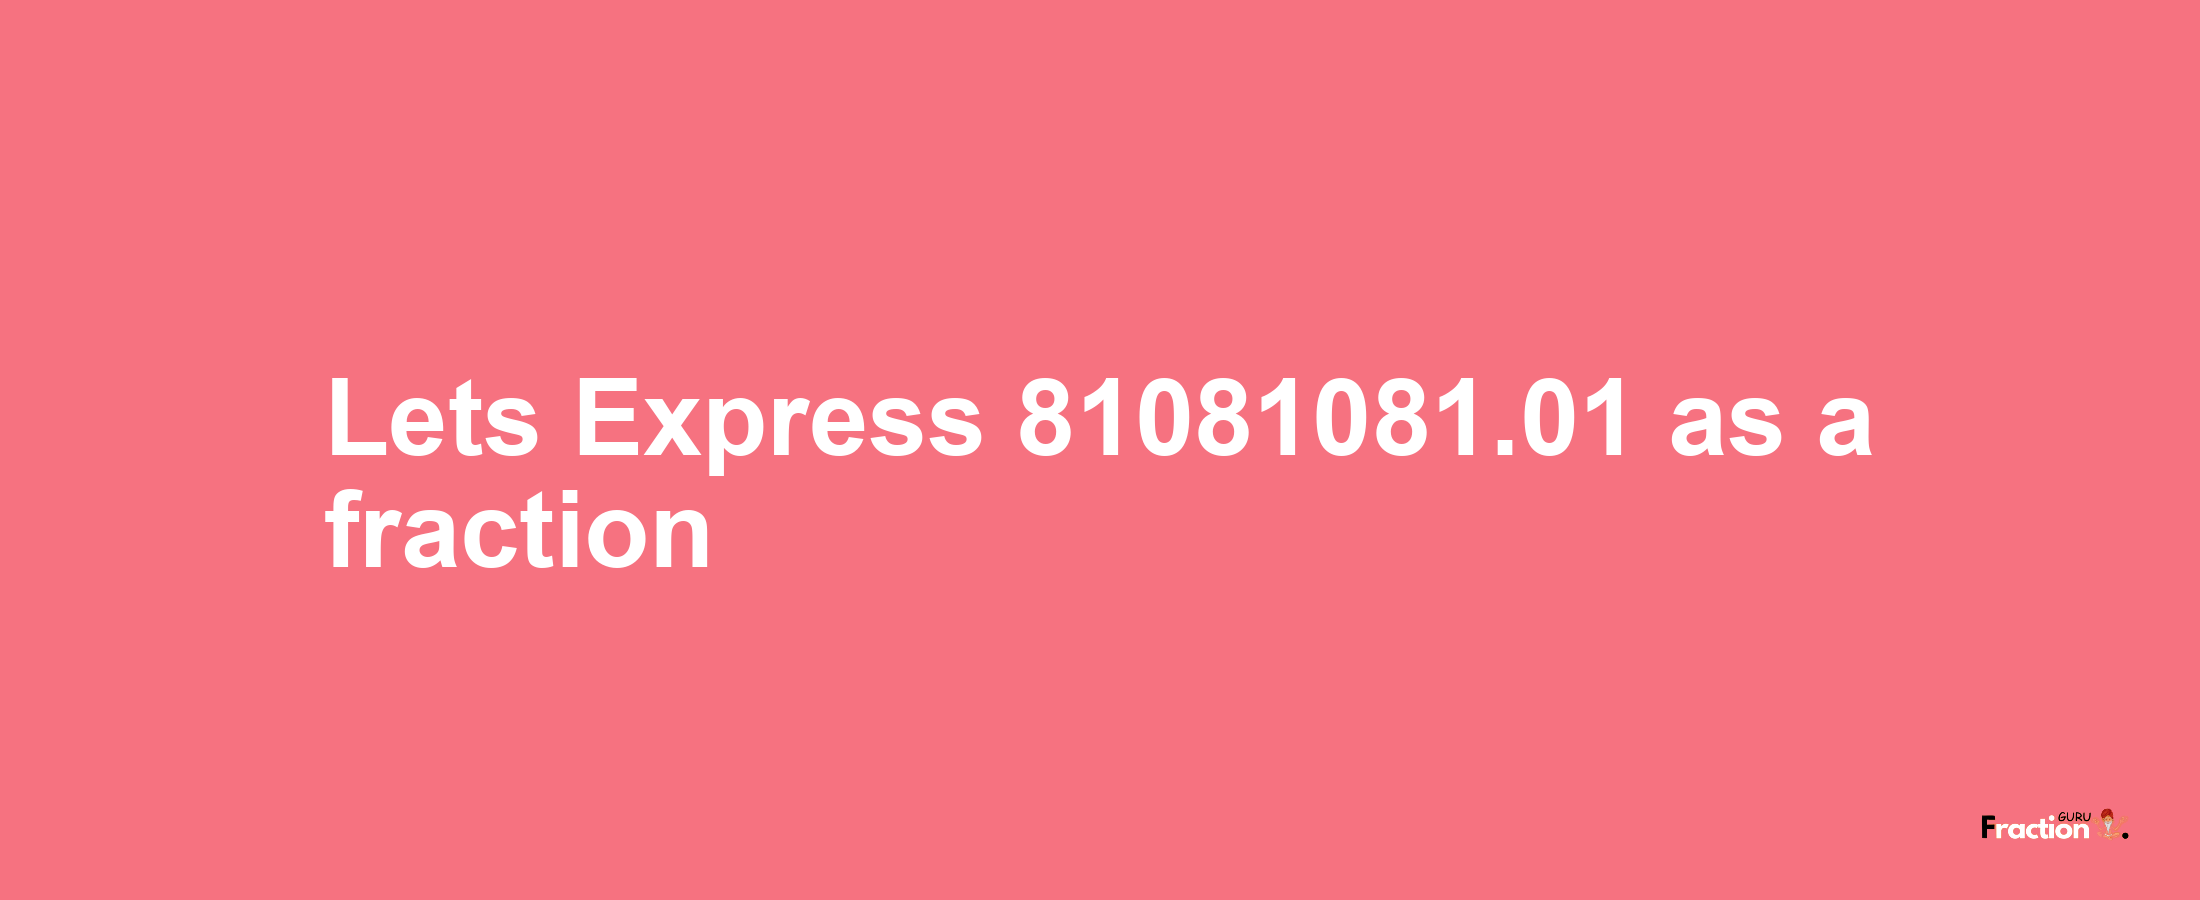 Lets Express 81081081.01 as afraction